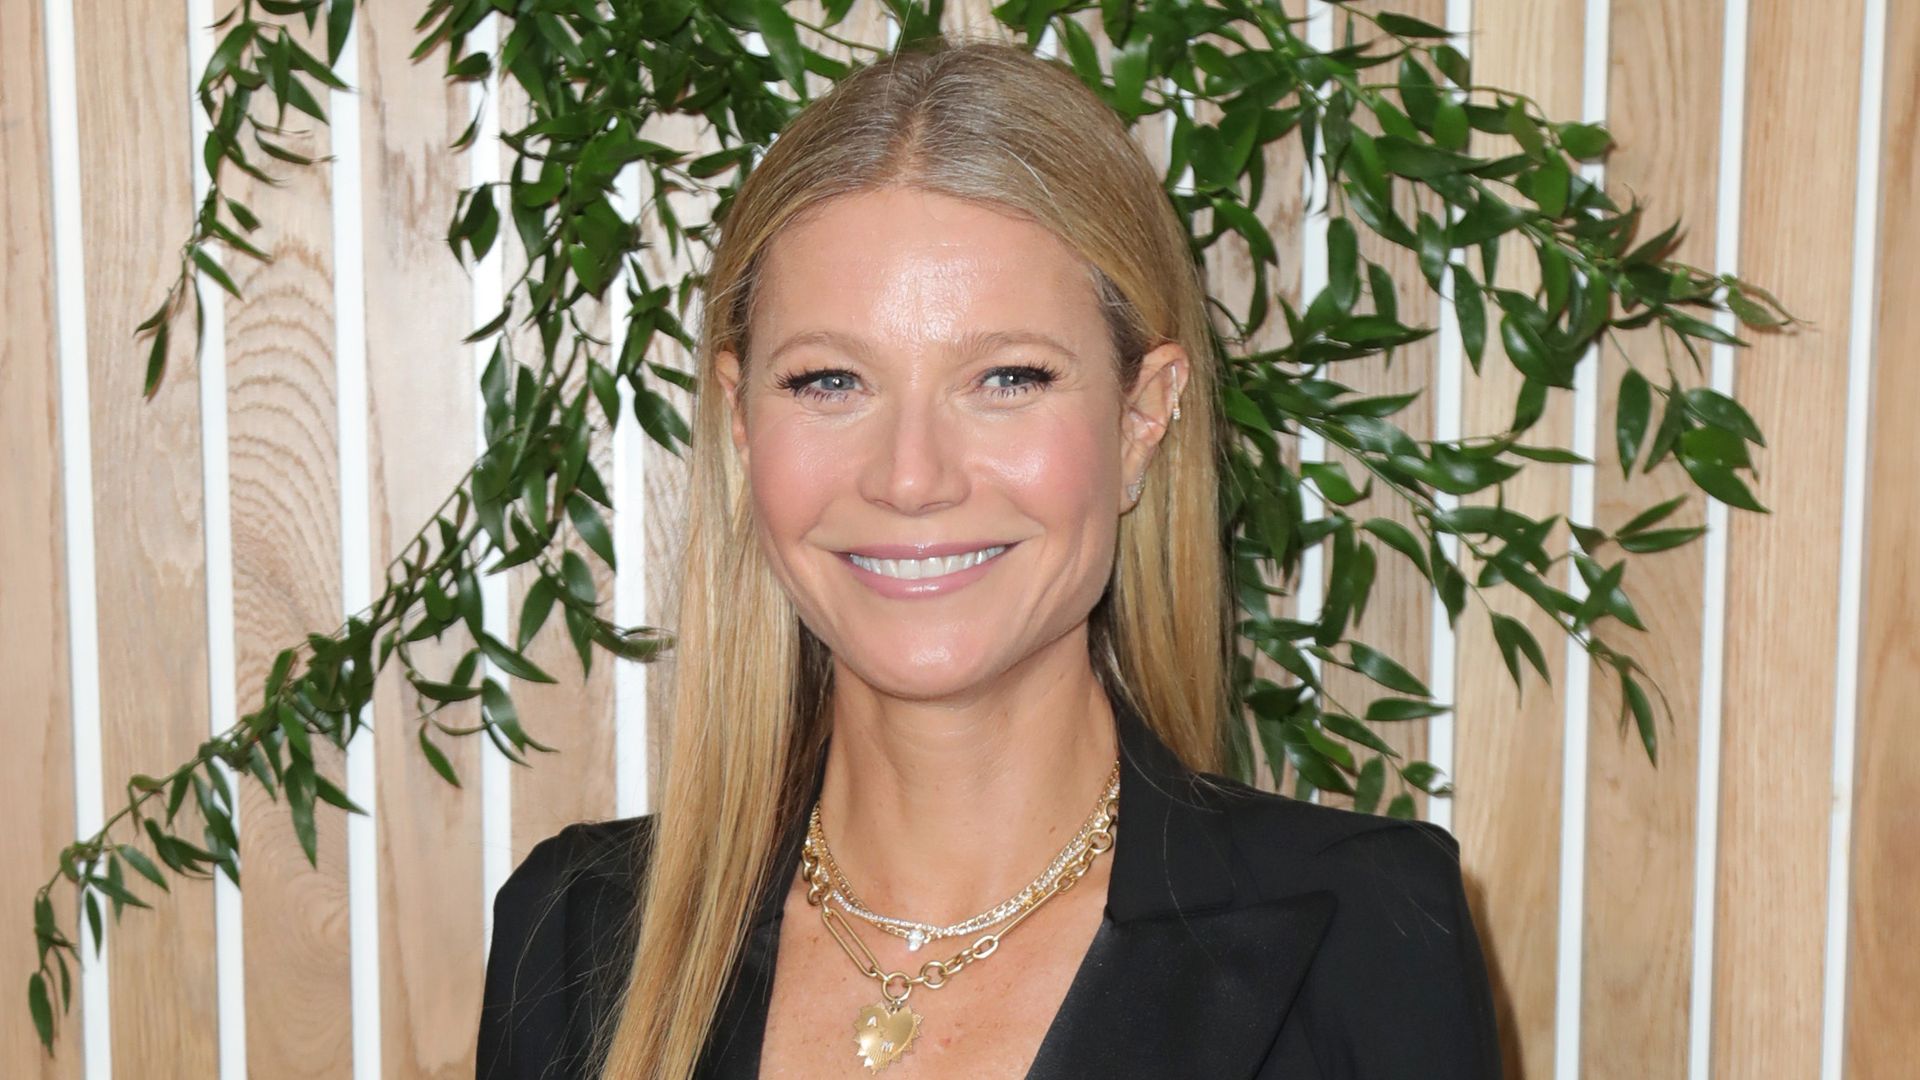 Gwyneth Paltrow attends 1 Hotel West Hollywood Grand Opening Event at 1 Hotel West Hollywood in 2019